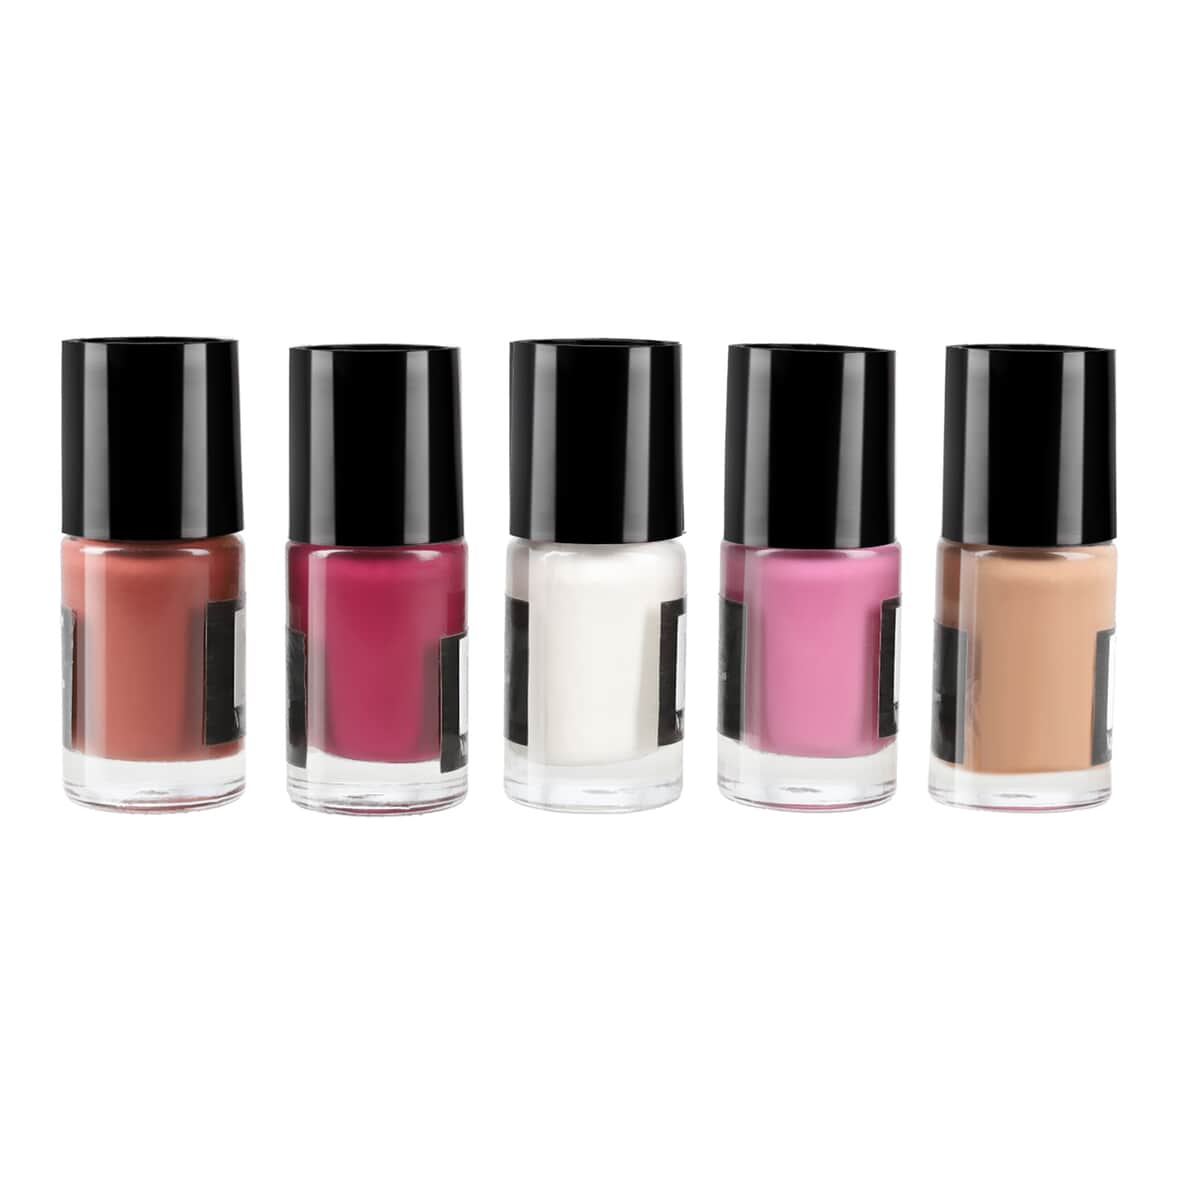 Nutriglow Set of 10 Nail Polishes (10 ml) image number 4